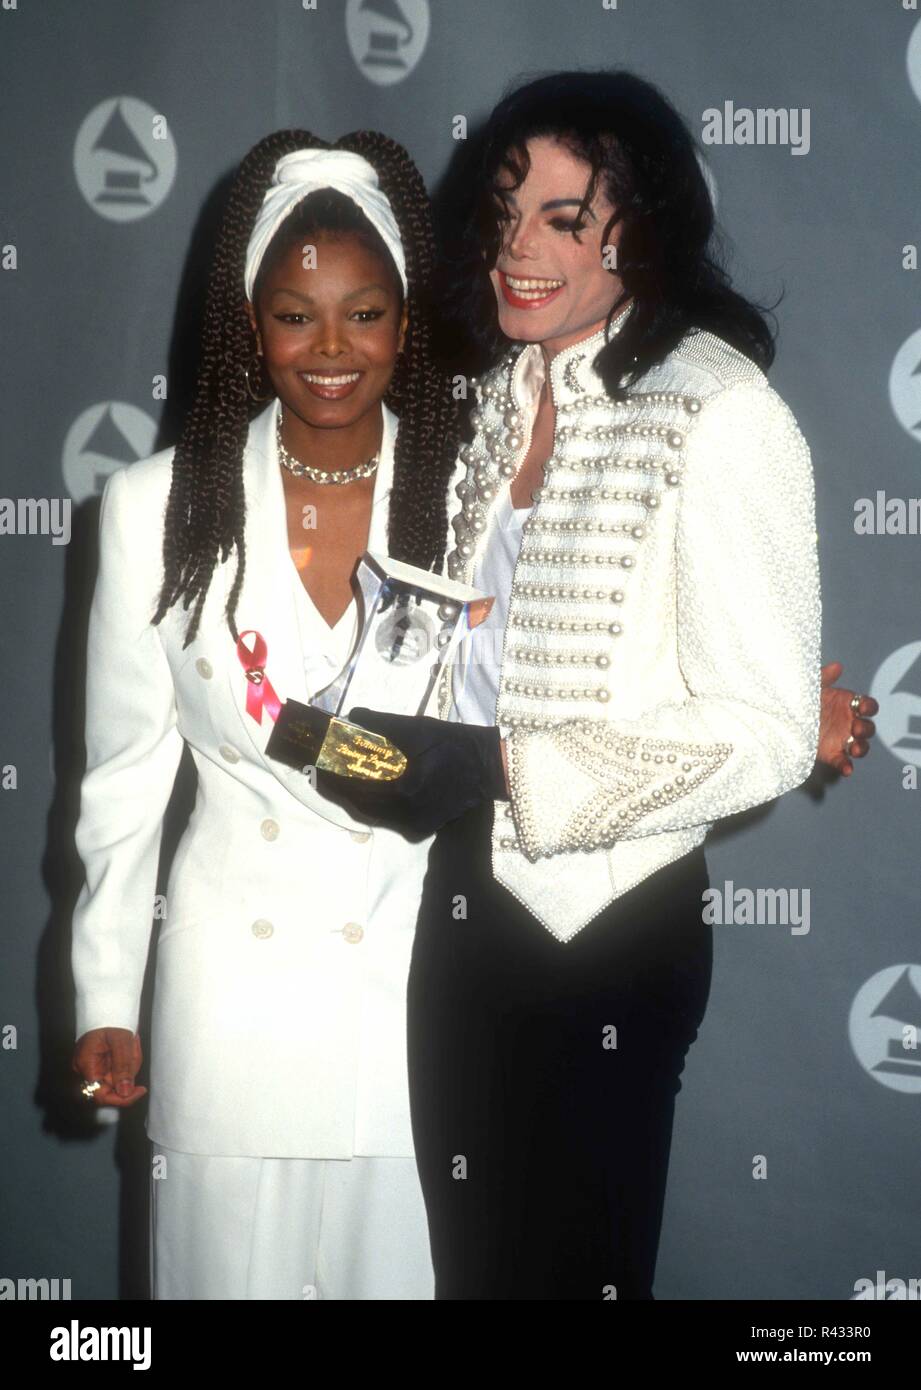 LOS ANGELES, CA - FEBRUARY 24: Singer Janet Jackson and brother singer Michael Jackson attend the 35th Annual Grammy Awards on February 24, 1993 at the Shrine Auditorium in Los Angeles, California. Photo by Barry King/Alamy Stock Photo Stock Photo